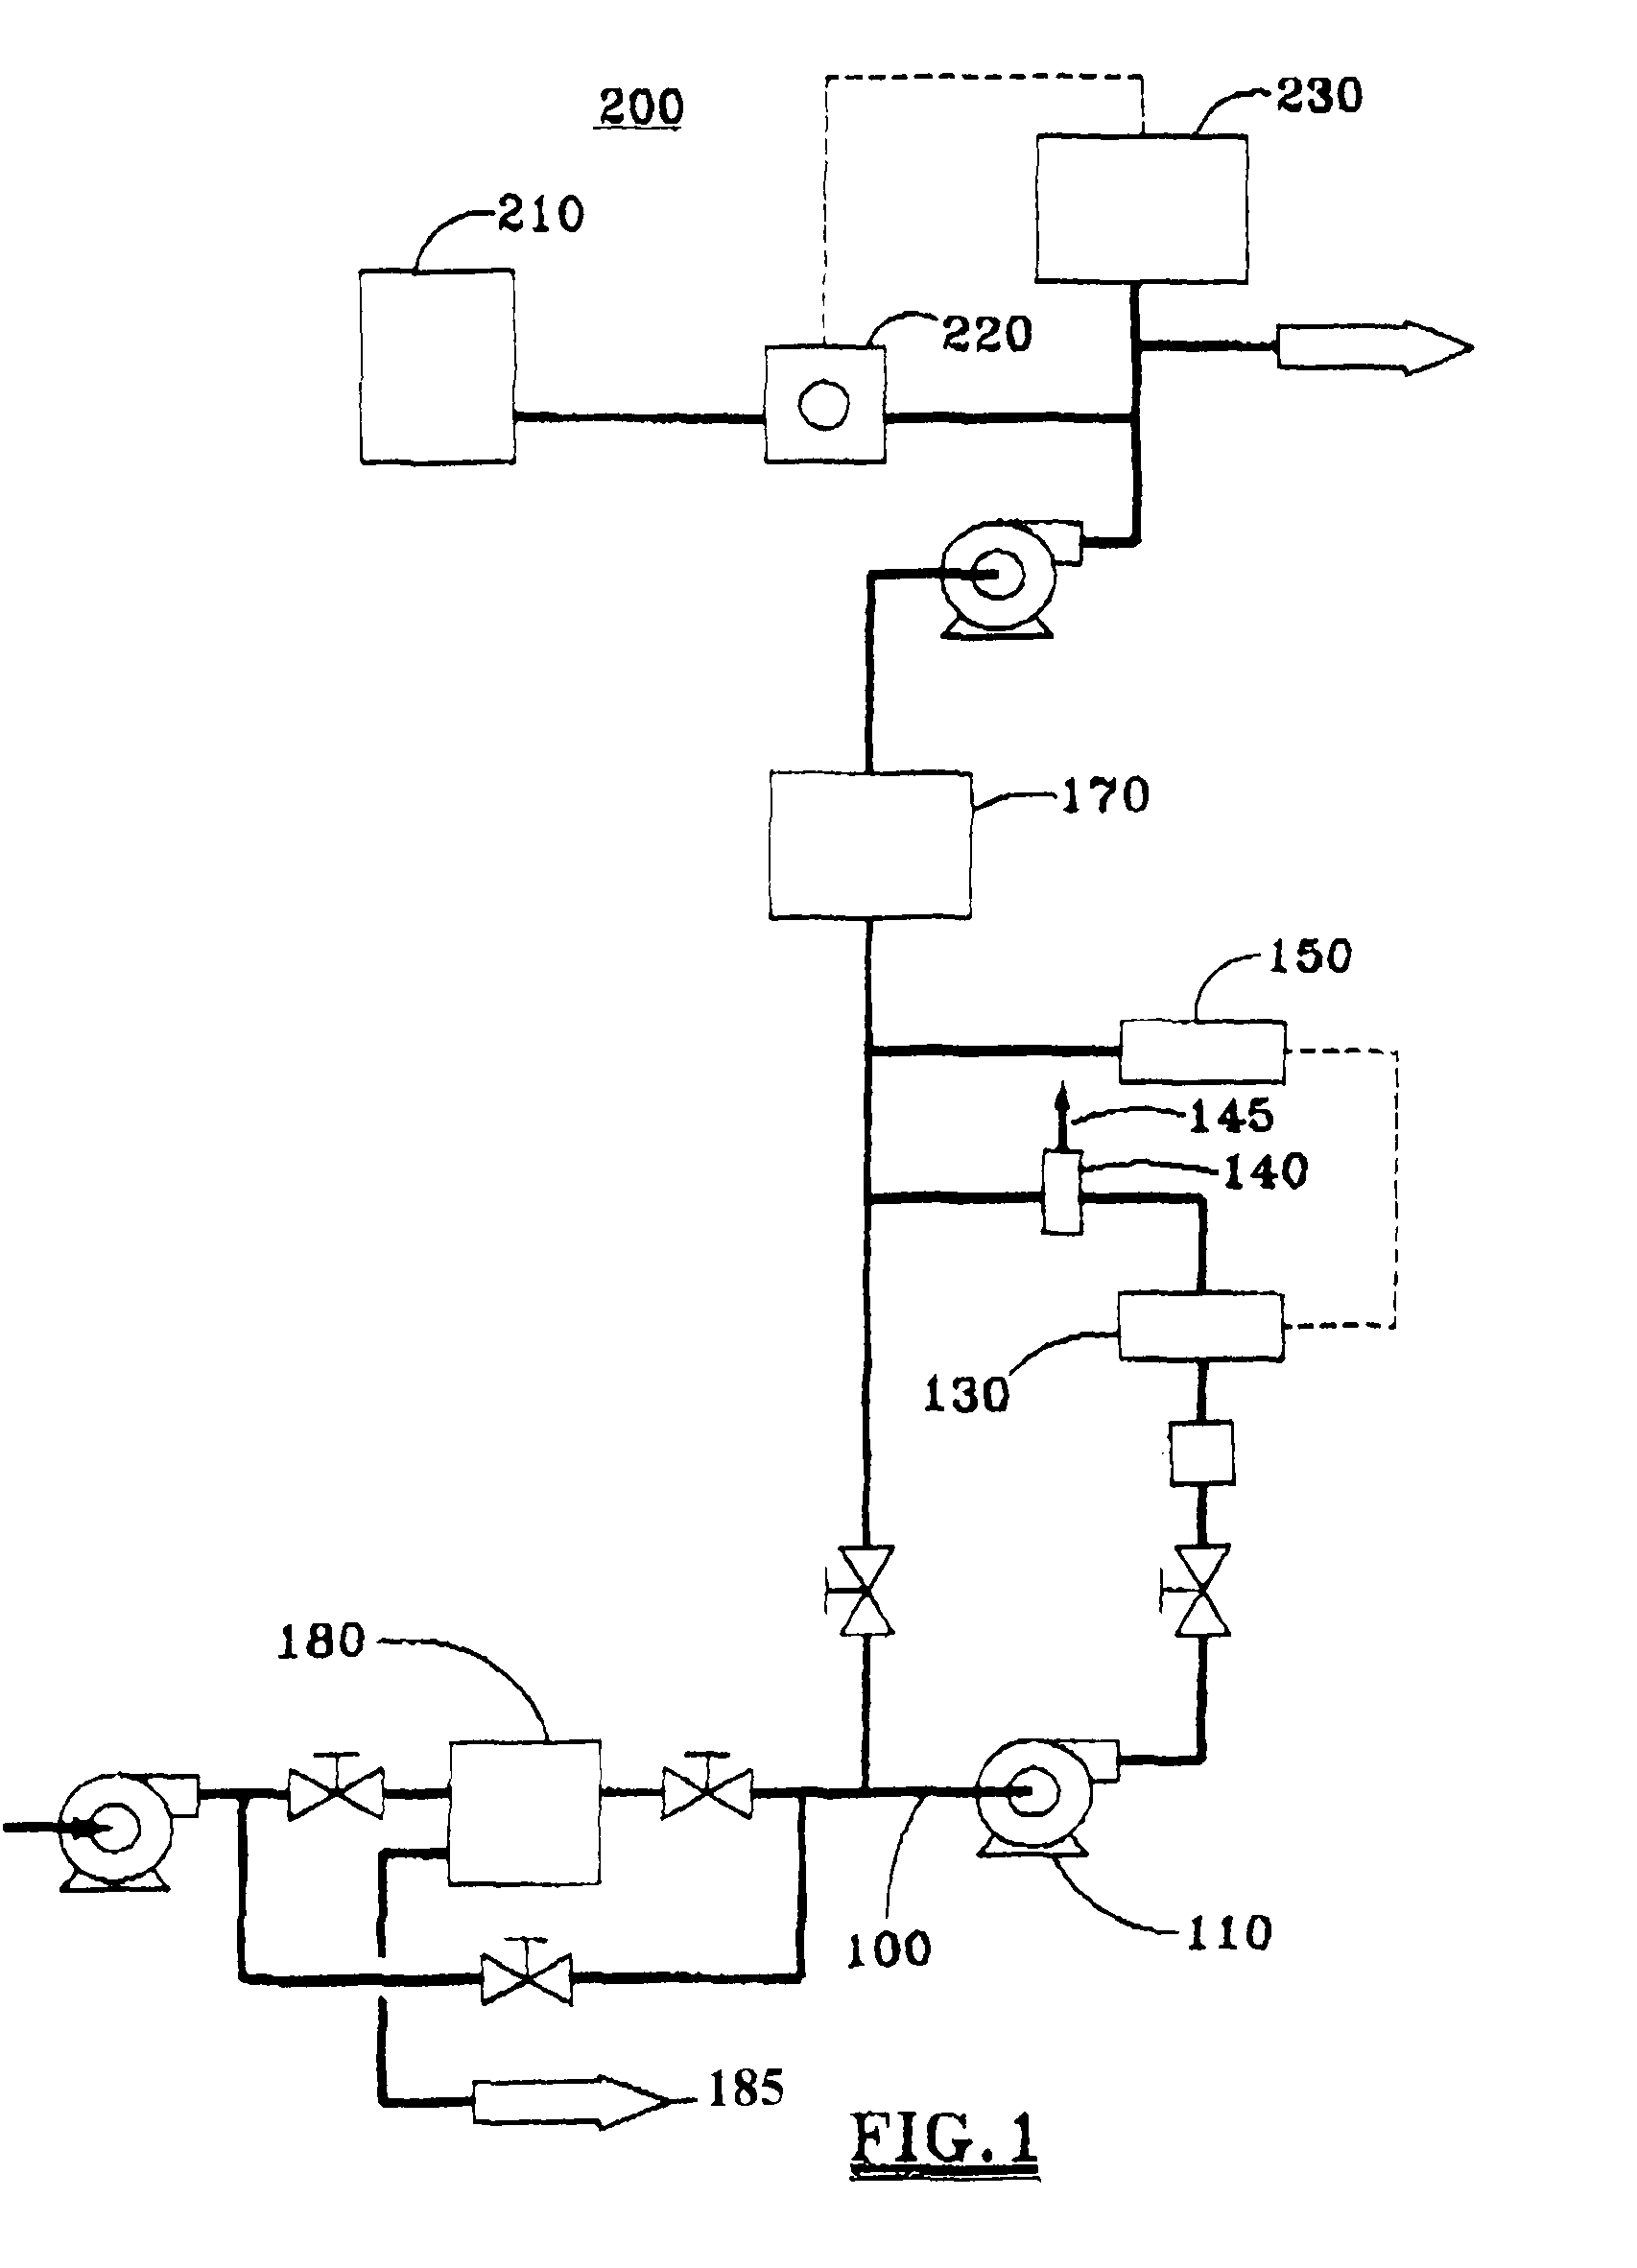 System and process for treatment and de-halogenation of ballast water